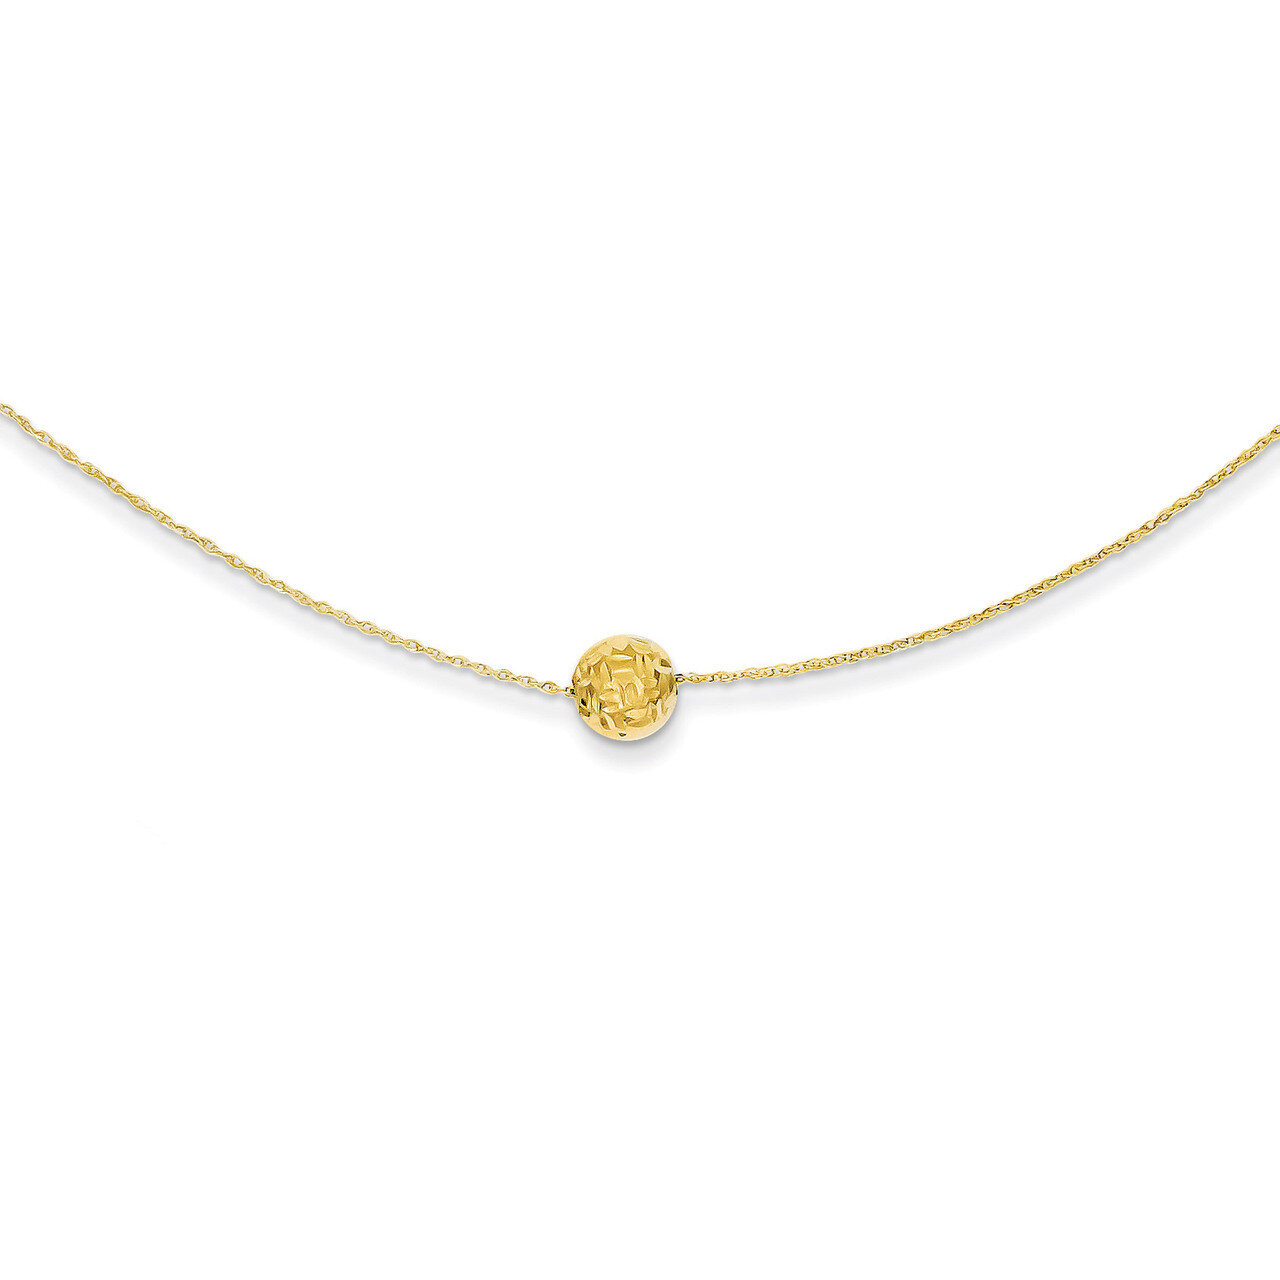 Bead Necklace 18 Inch 14k Gold SF1873-18